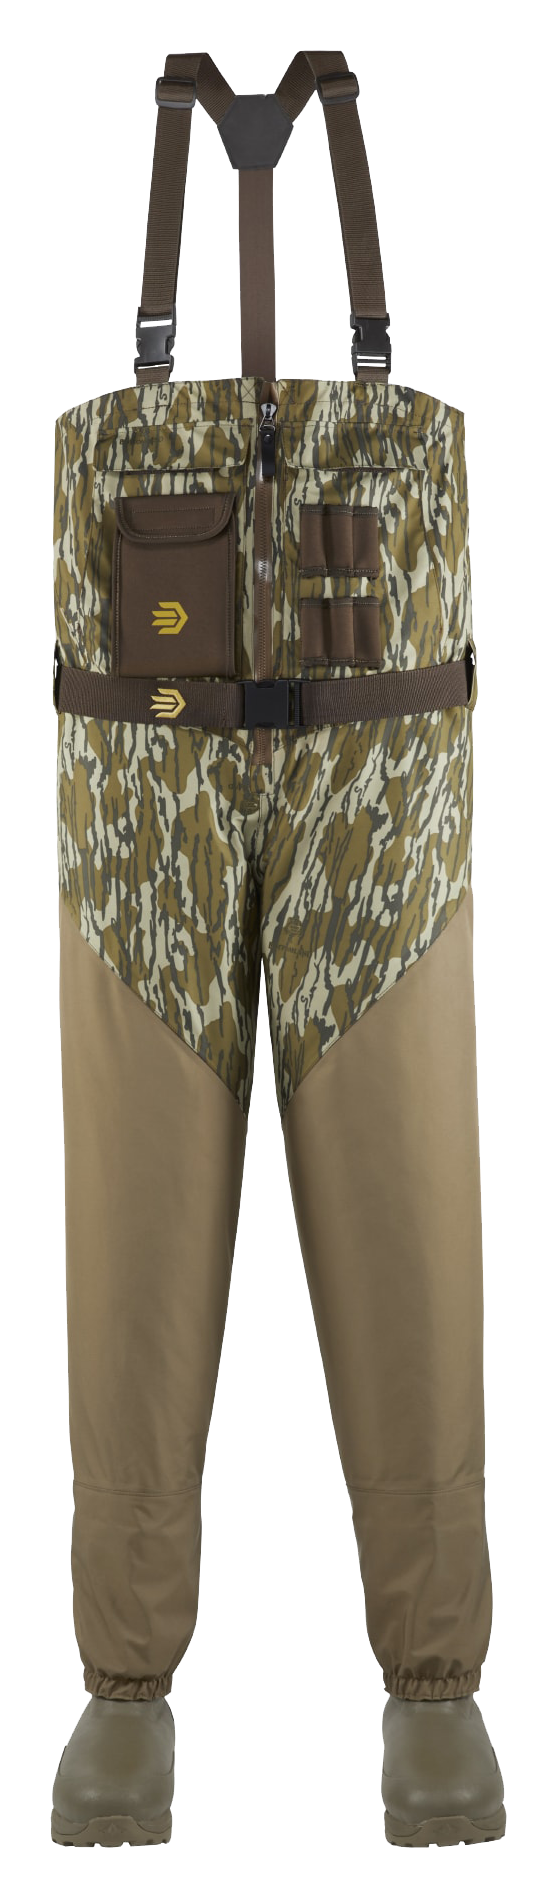 LaCrosse Alpha Agility Select Insulated Front-Zip Breathable Hunting Waders for Men - Mossy Oak Original Bottomland - 9/Medium